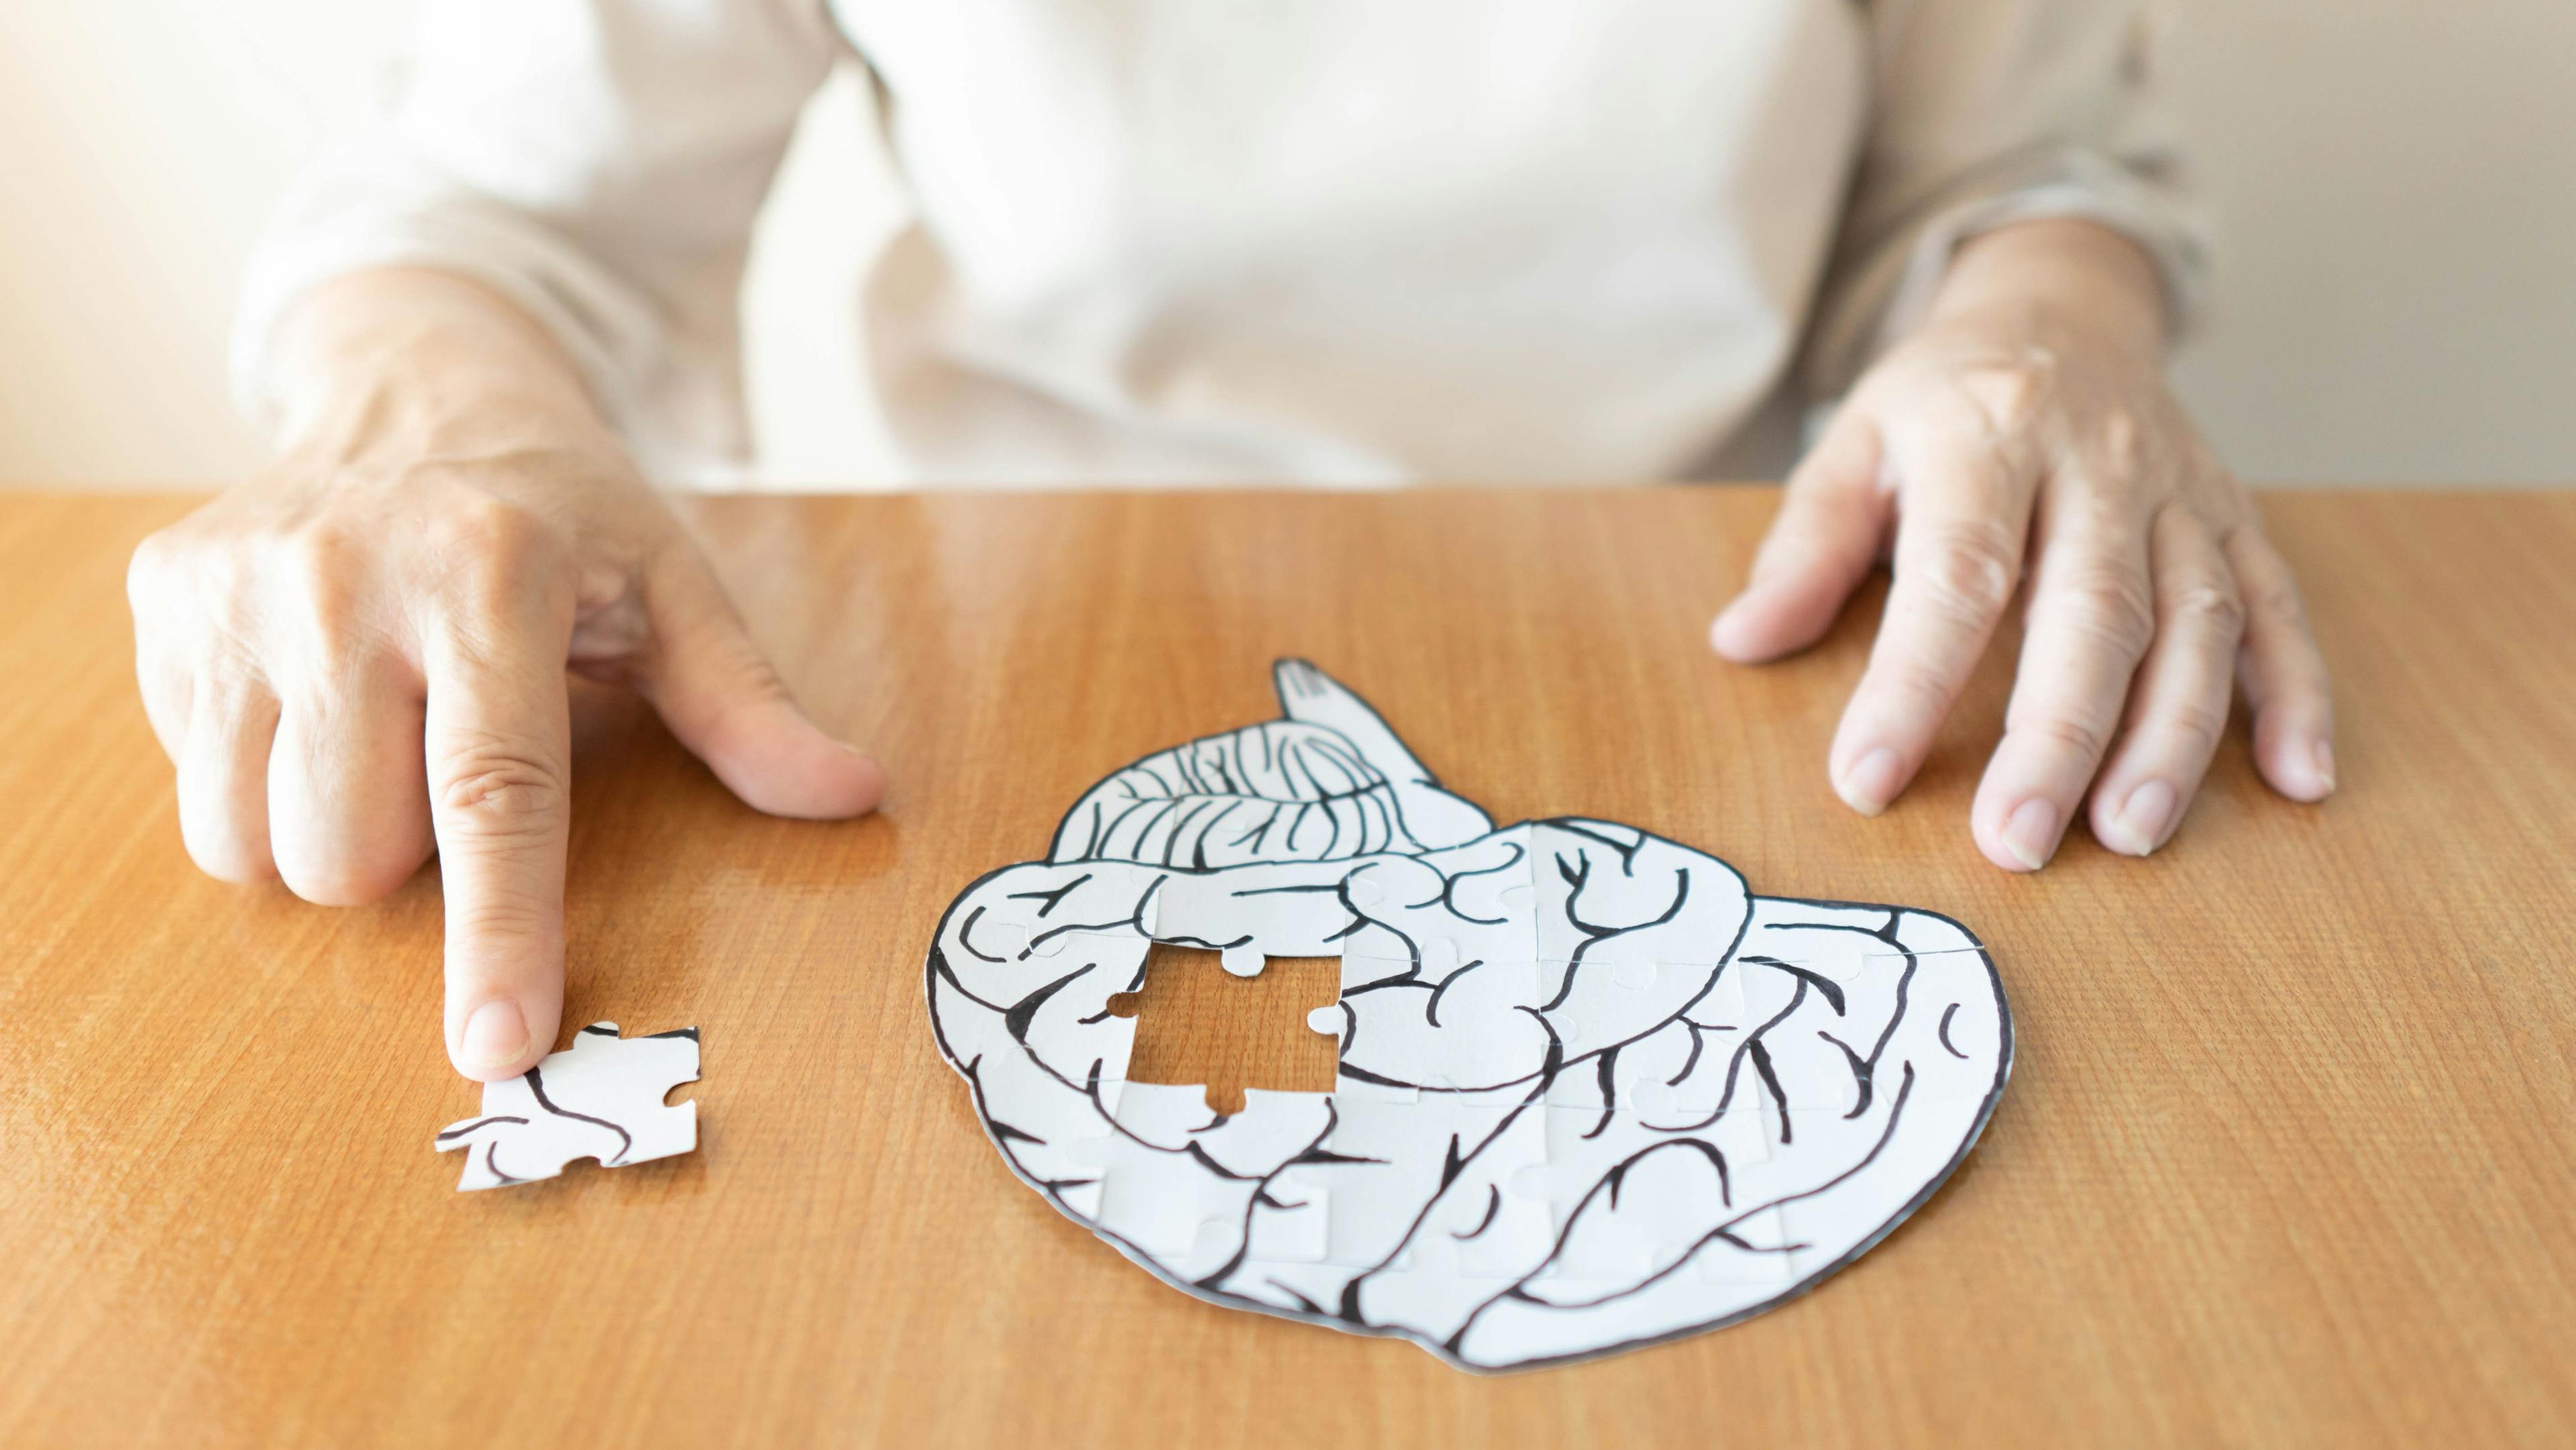 Elderly woman putting together brain-shaped puzzle -- Image credit: Orawan | stock.adobe.com